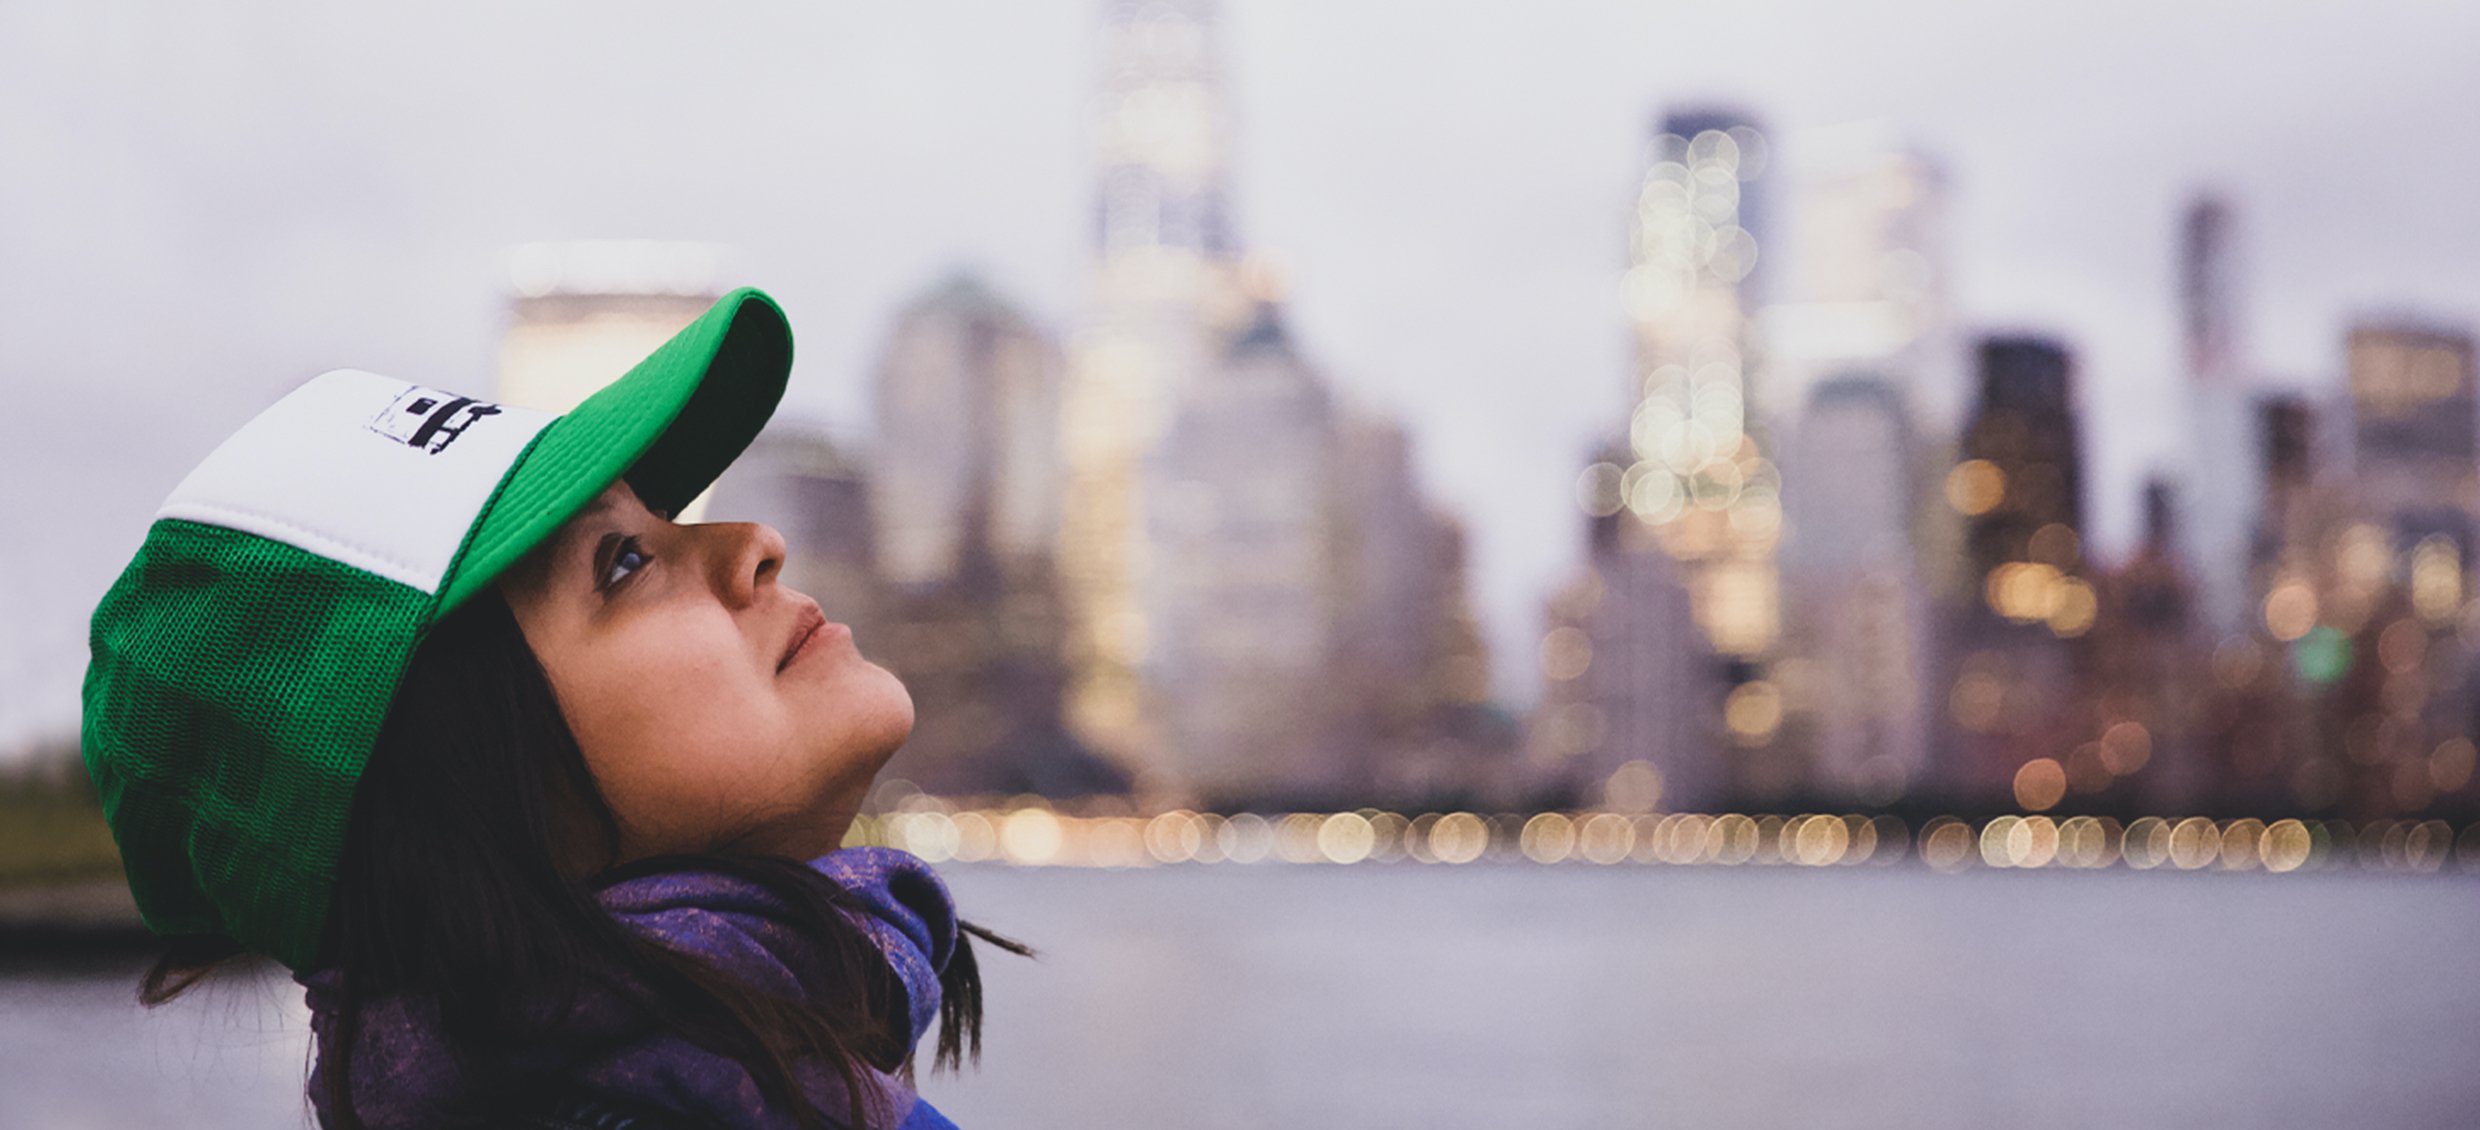 A young woman gazes up hopefully at the sky in front of the New York cityscape.